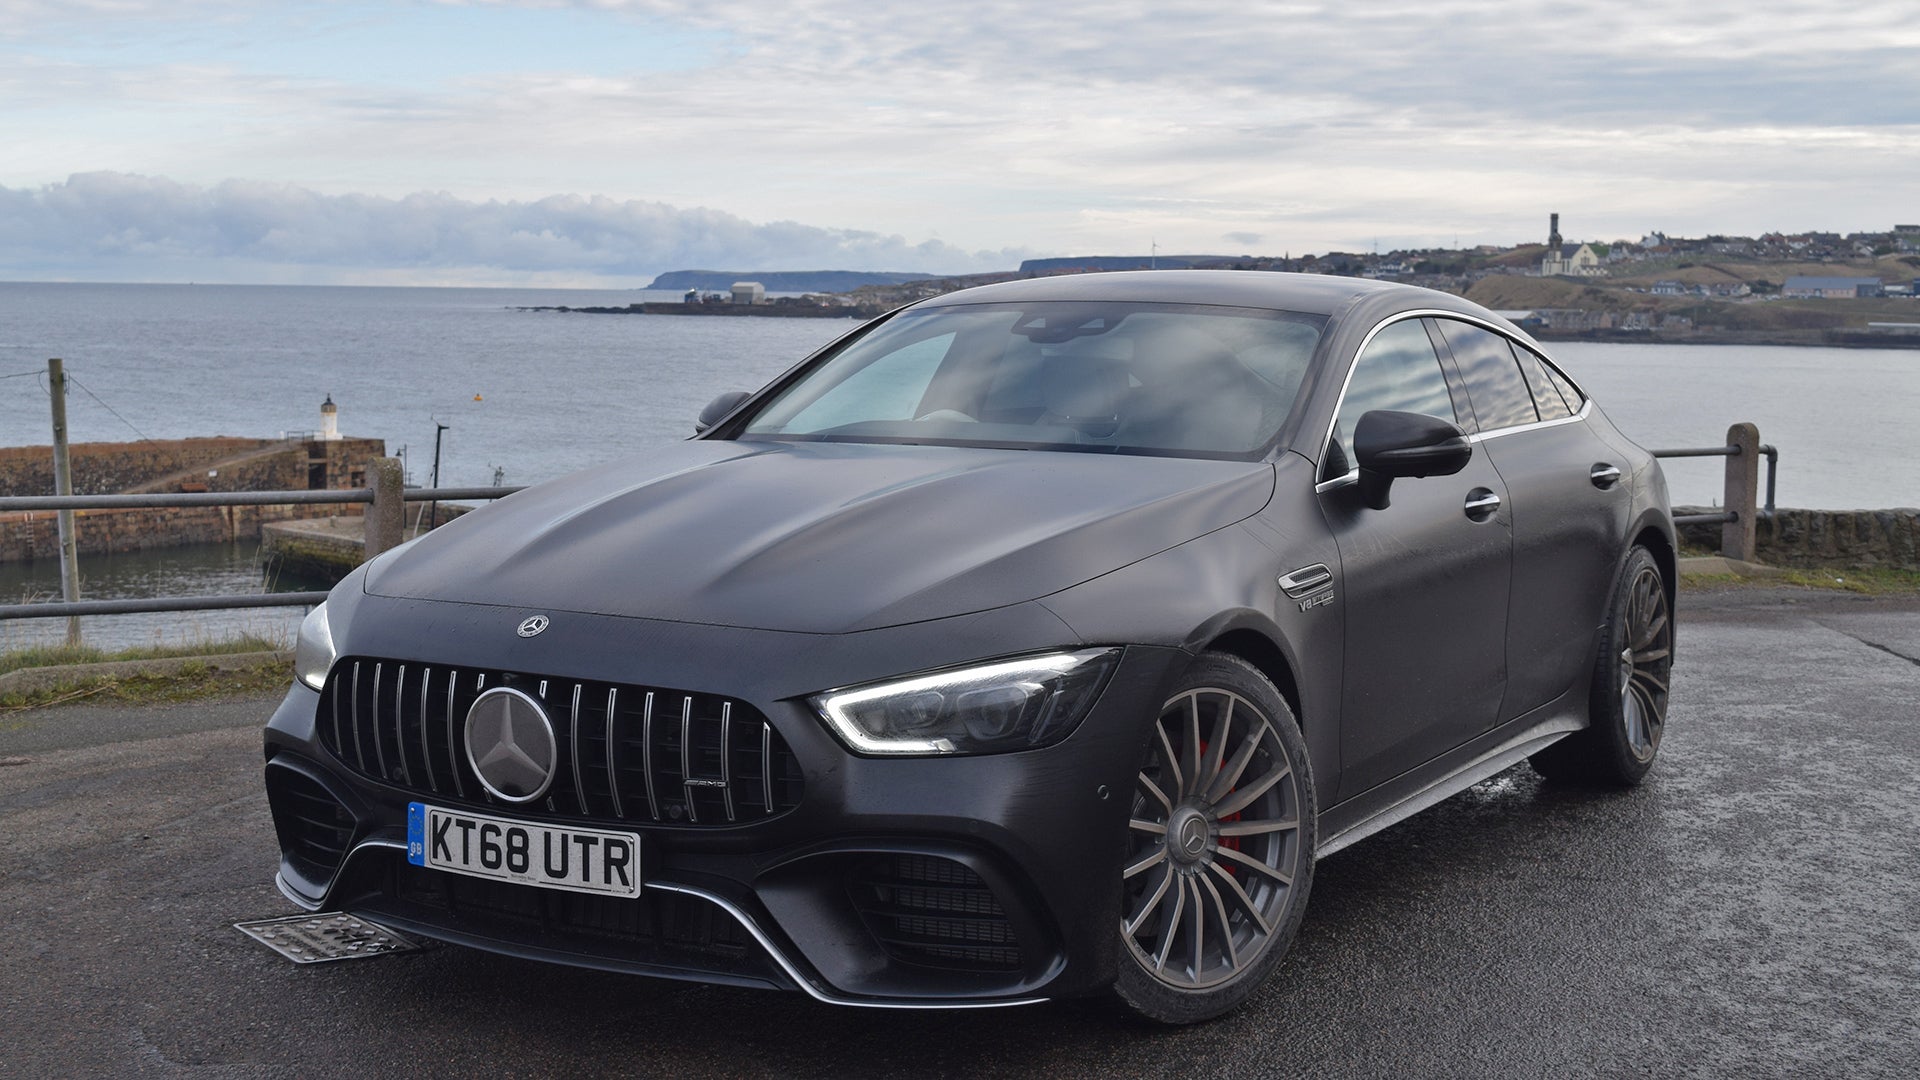 2019 Mercedes-AMG GT 63 4-Door First Drive: The E63 That Sees Itself As a GT C